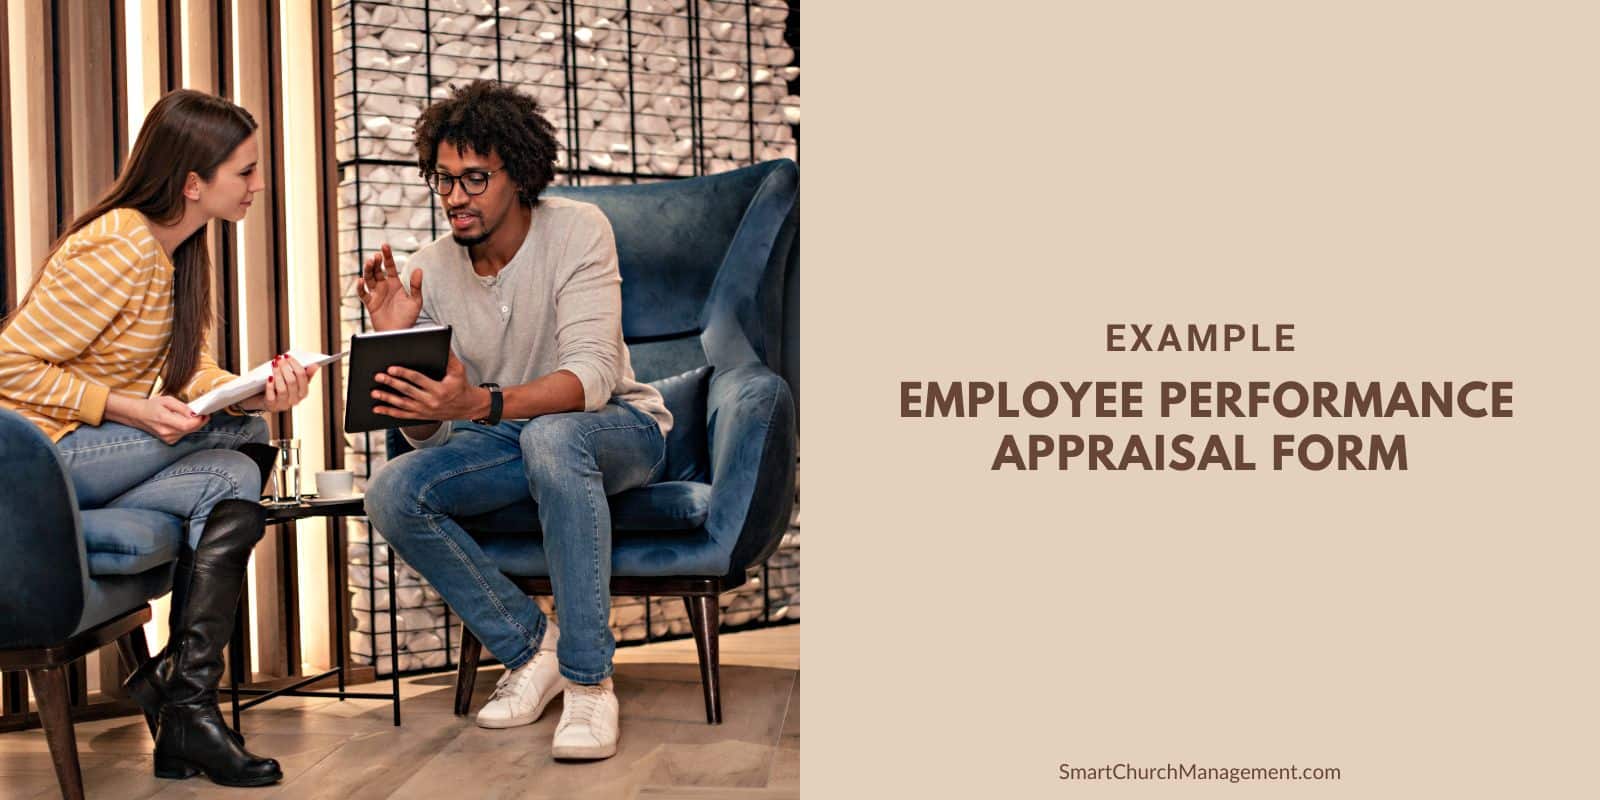 Performance appraisal example for churches